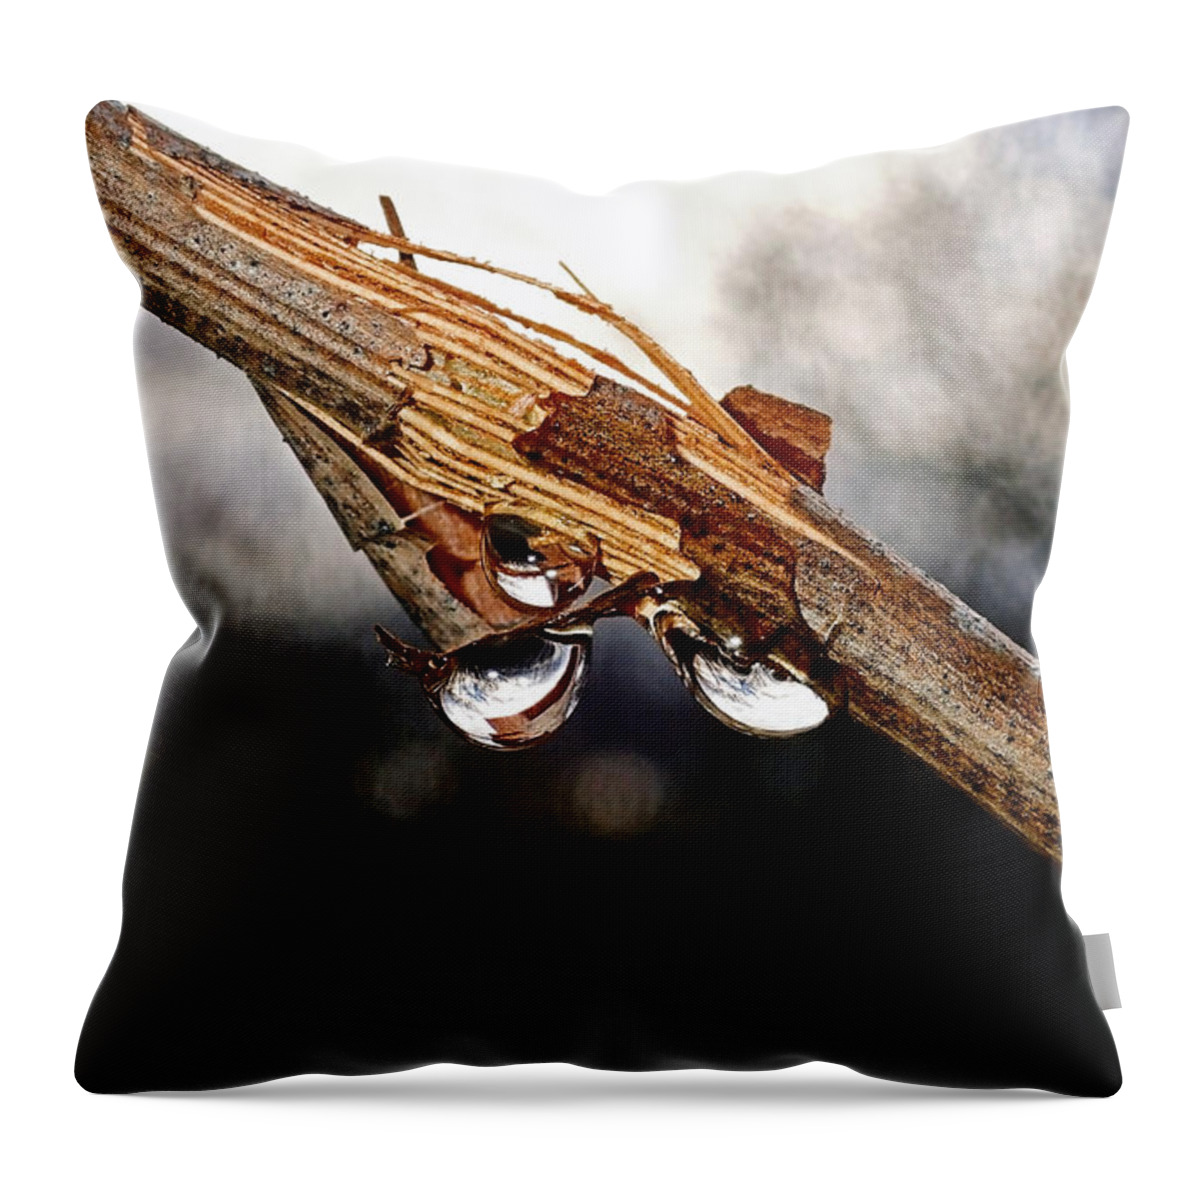 Three Drops Of Water Throw Pillow featuring the photograph Three drops of water, sources of life by Asbed Iskedjian